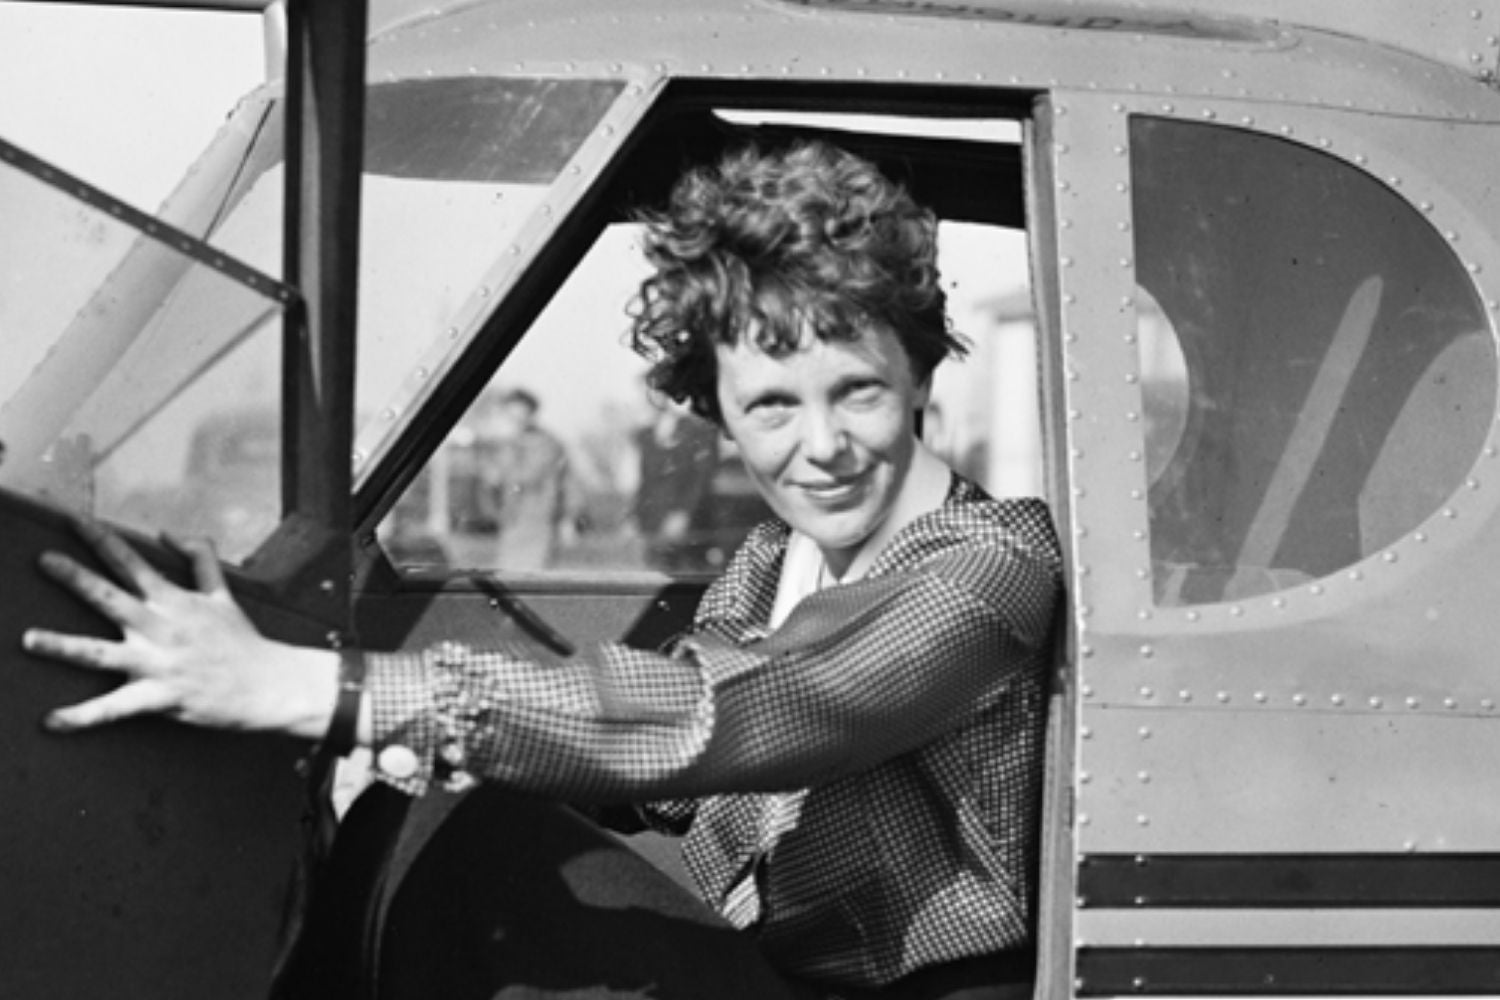 amelia earhart sitting in cockpit black and white photo